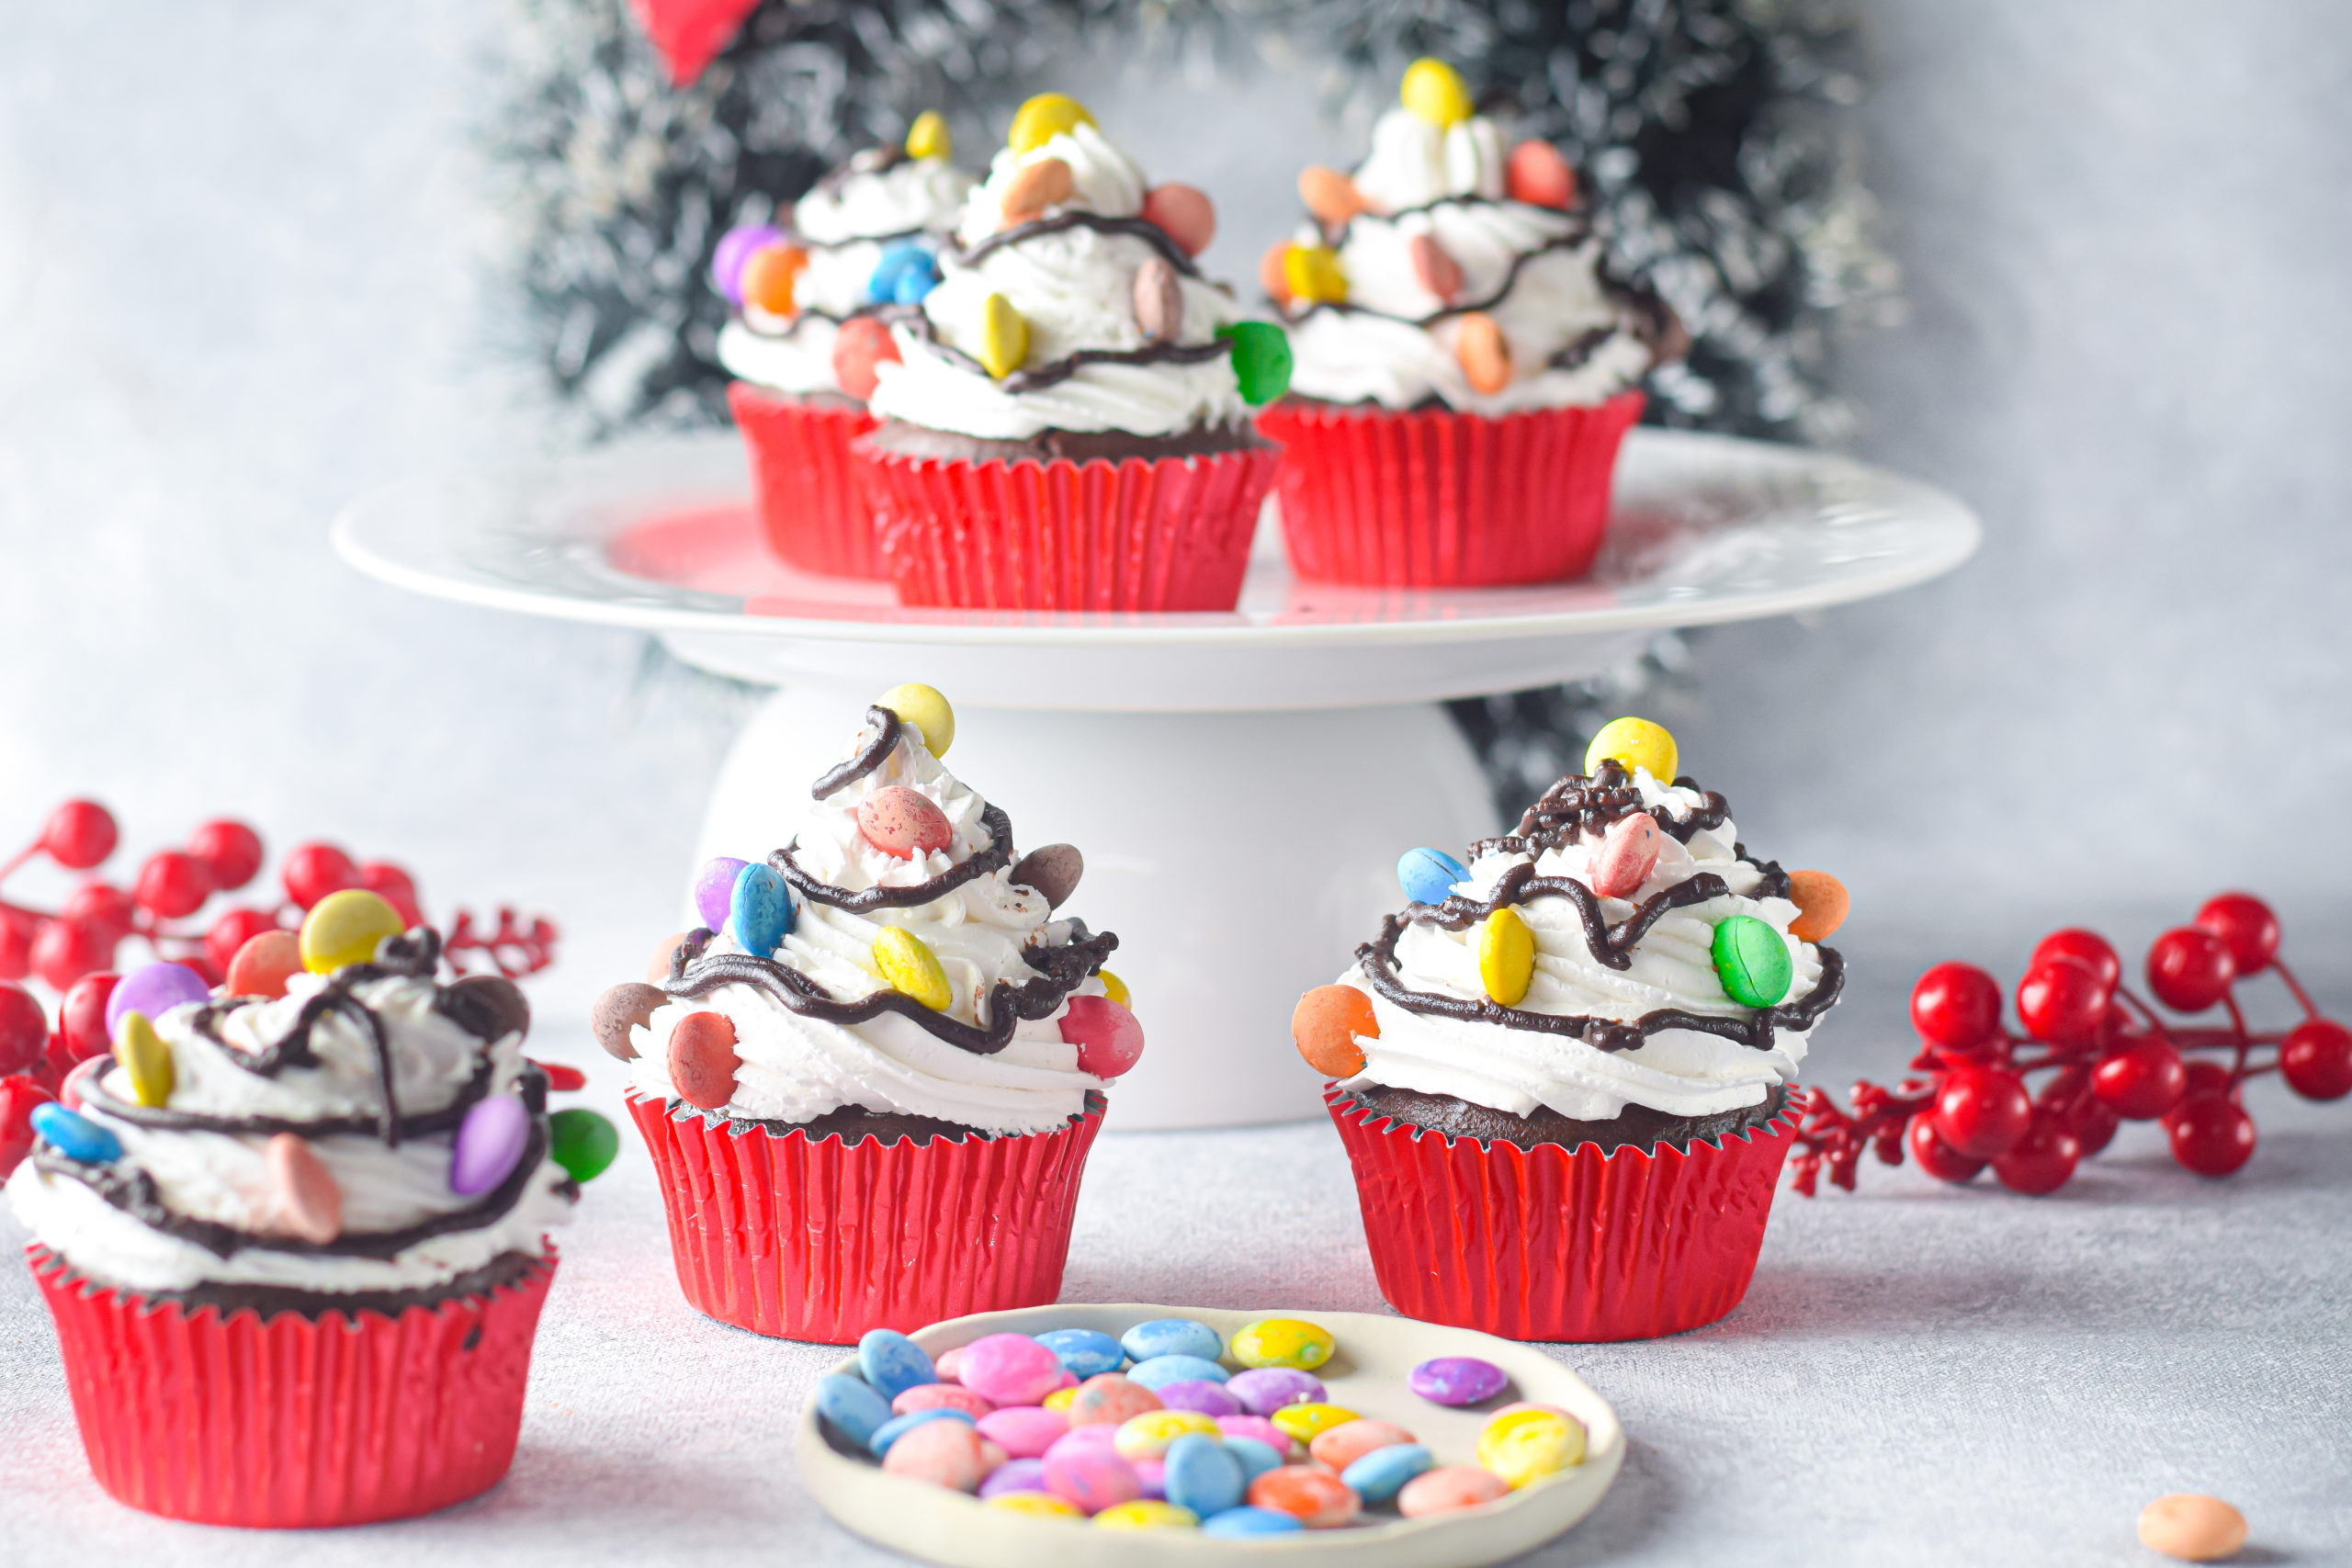 Learn how to easily make Christmas light cupcakes from scratch. They're delicious and instantly elevate any holiday dessert table!